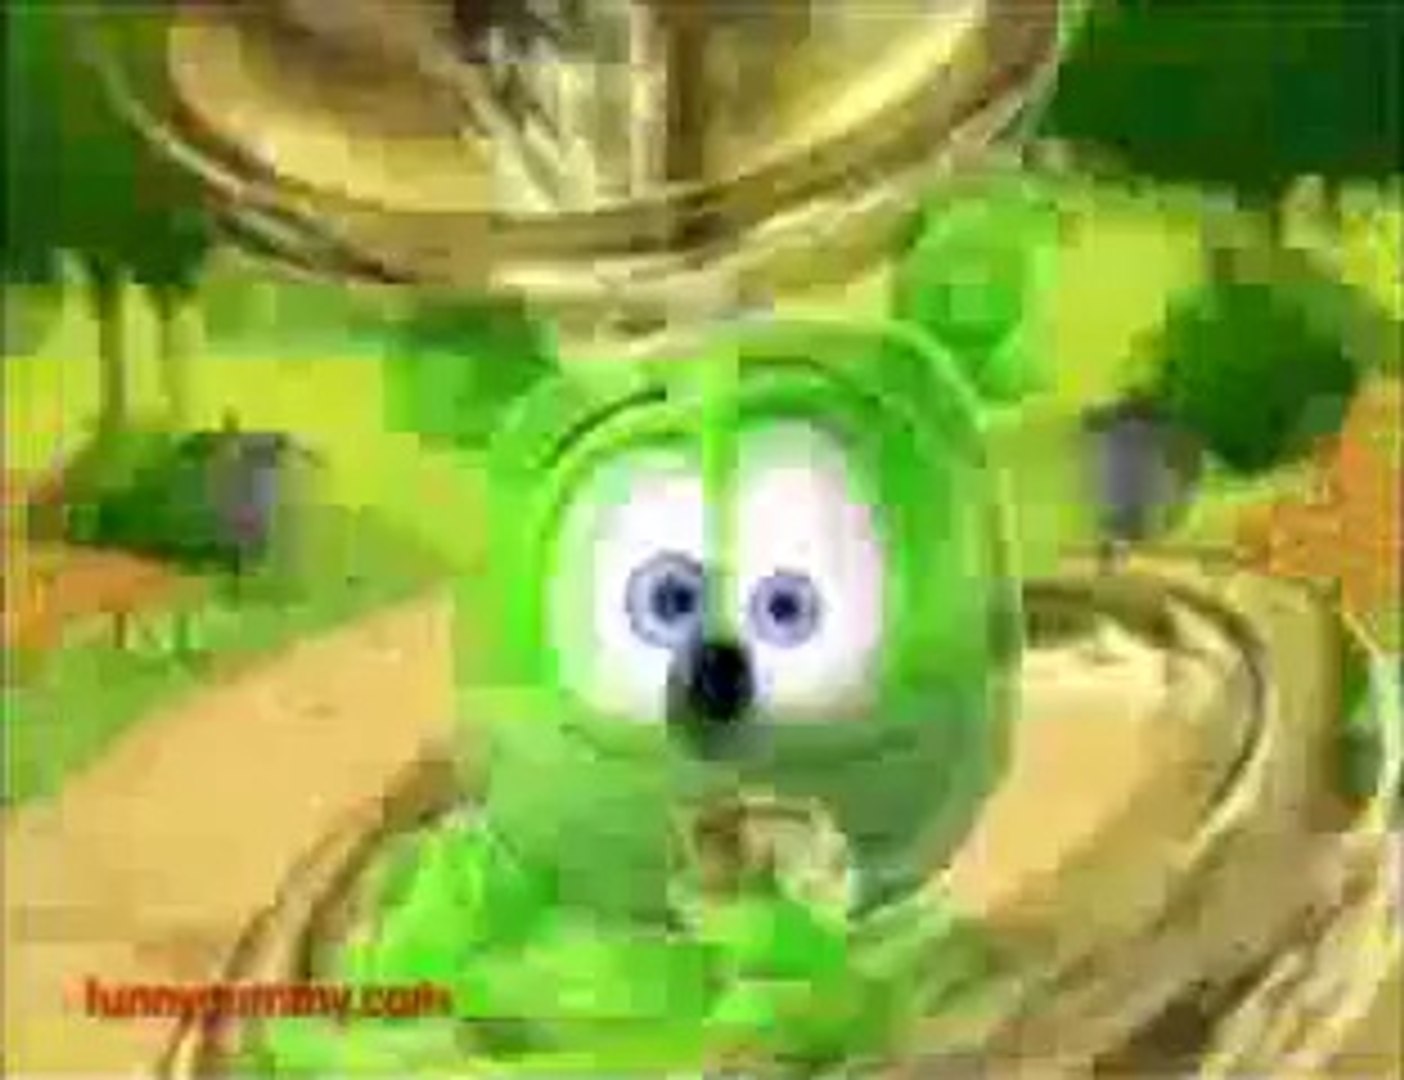 The Gummy Bear Song Long English Version_480p - video Dailymotion